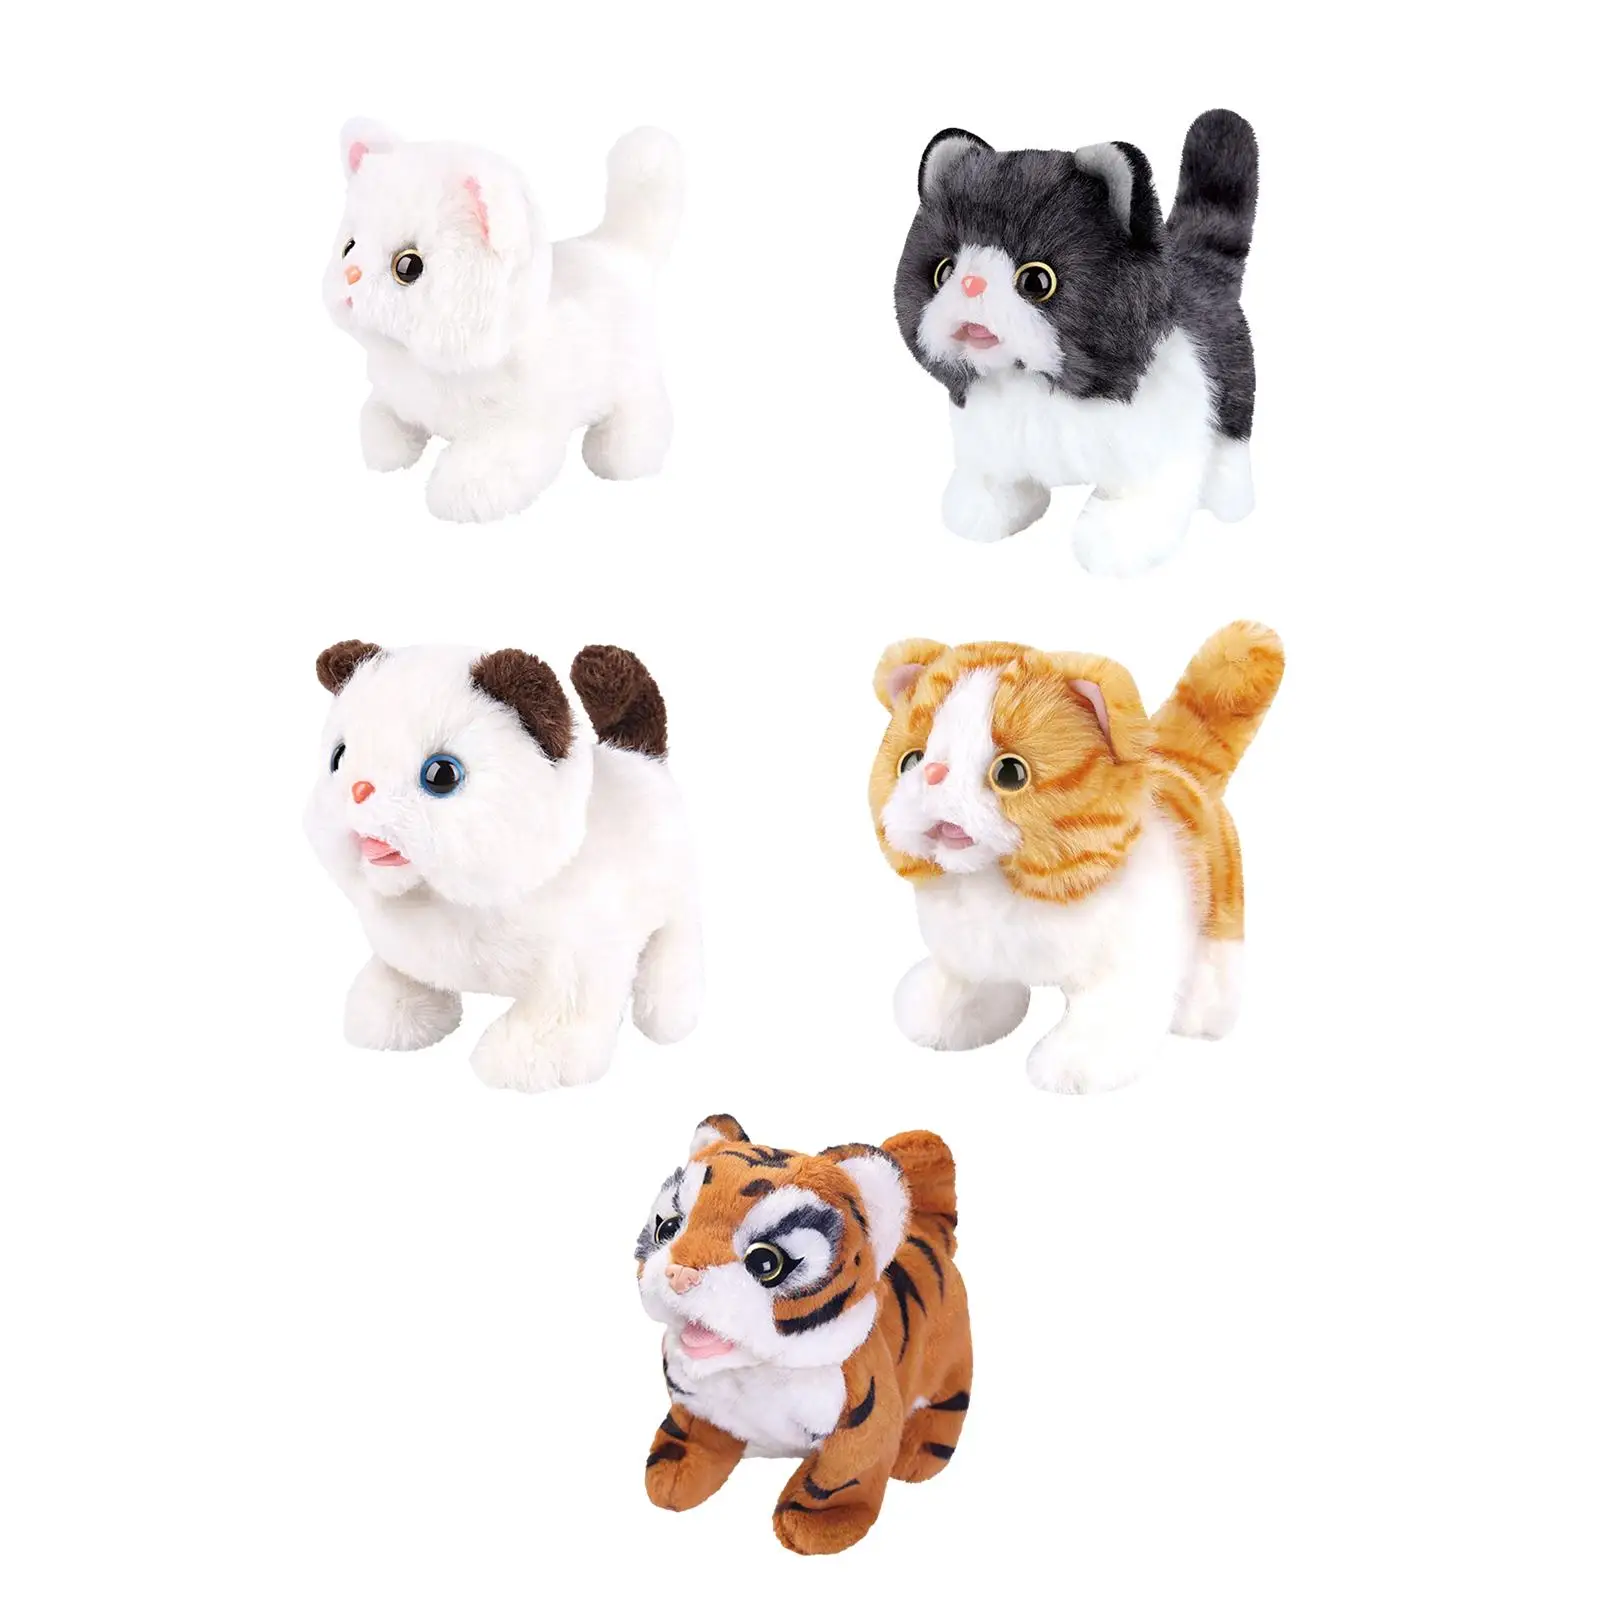 Lovely Electric Cat Plush Toy Interactive Play Stuffed Animal Plush for Baby